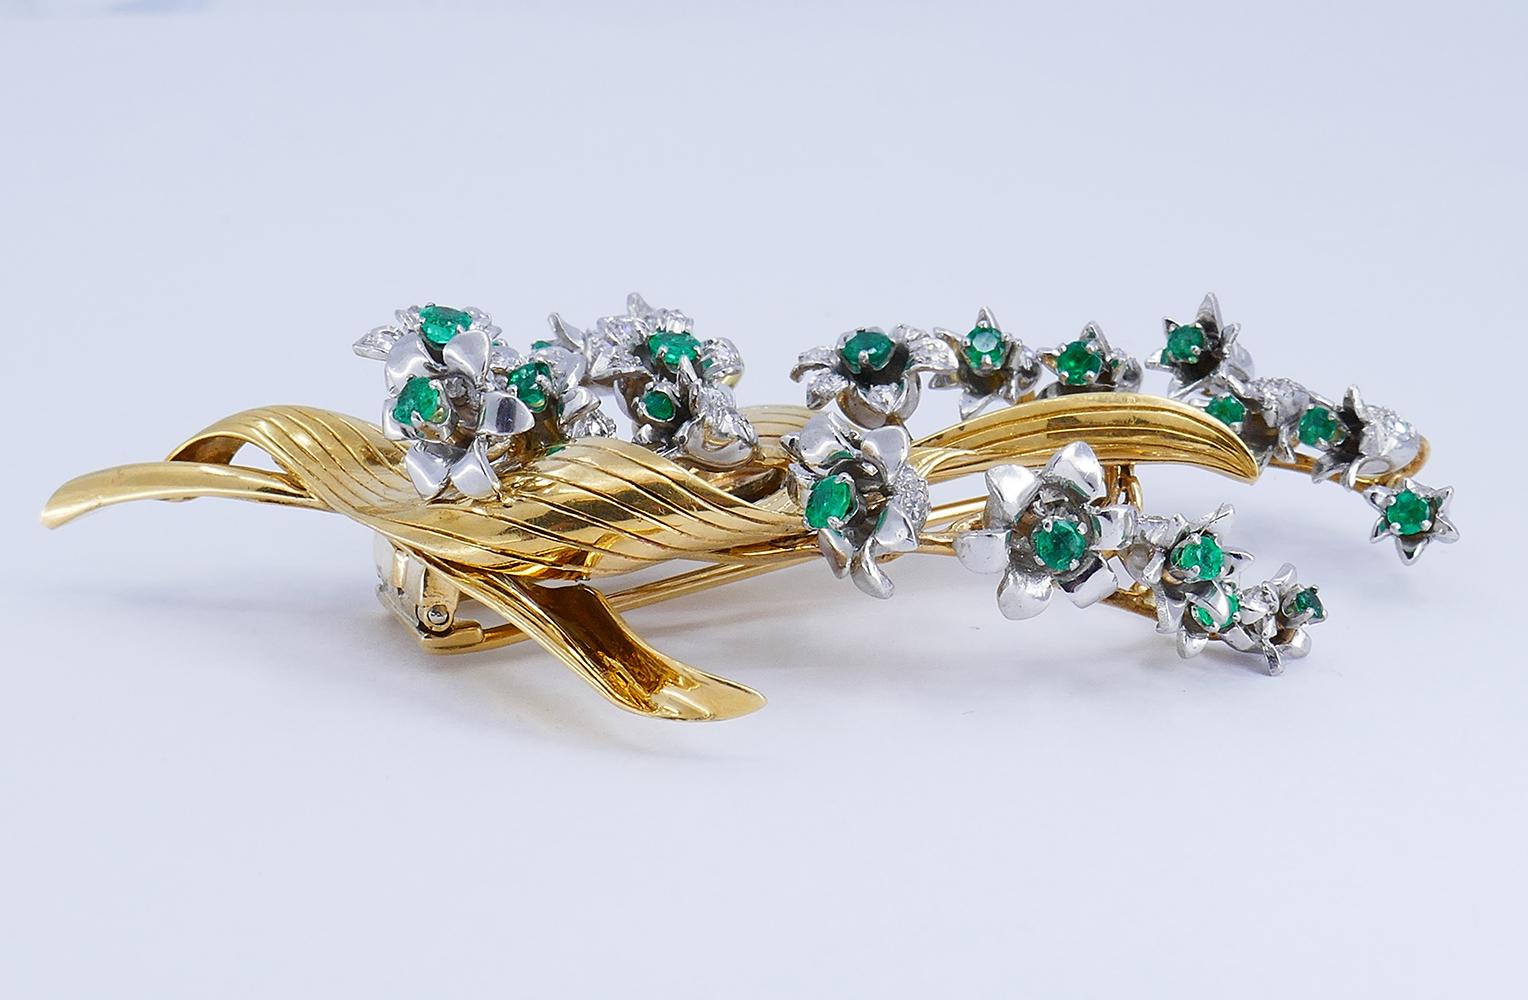 A gorgeous vintage 14 karat gold lily of the valley brooch, featuring emerald and diamond.
The vintage brooch has a floral design. The flowers are meticulously crafted of platinum. Their petals are accented with diamonds and the centers with